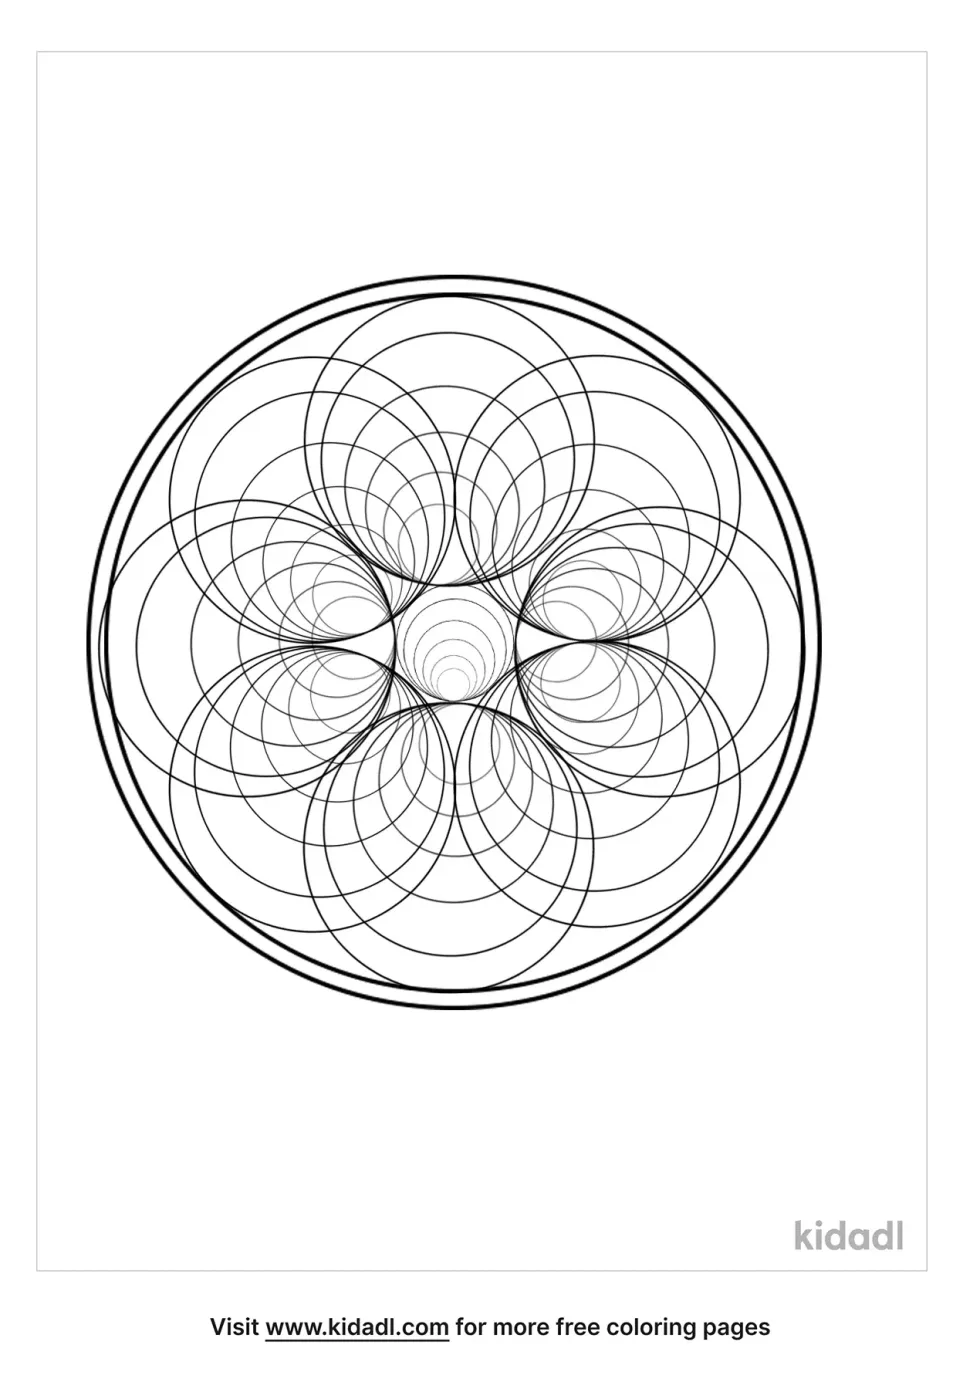 Difficult Circle Design Coloring Page